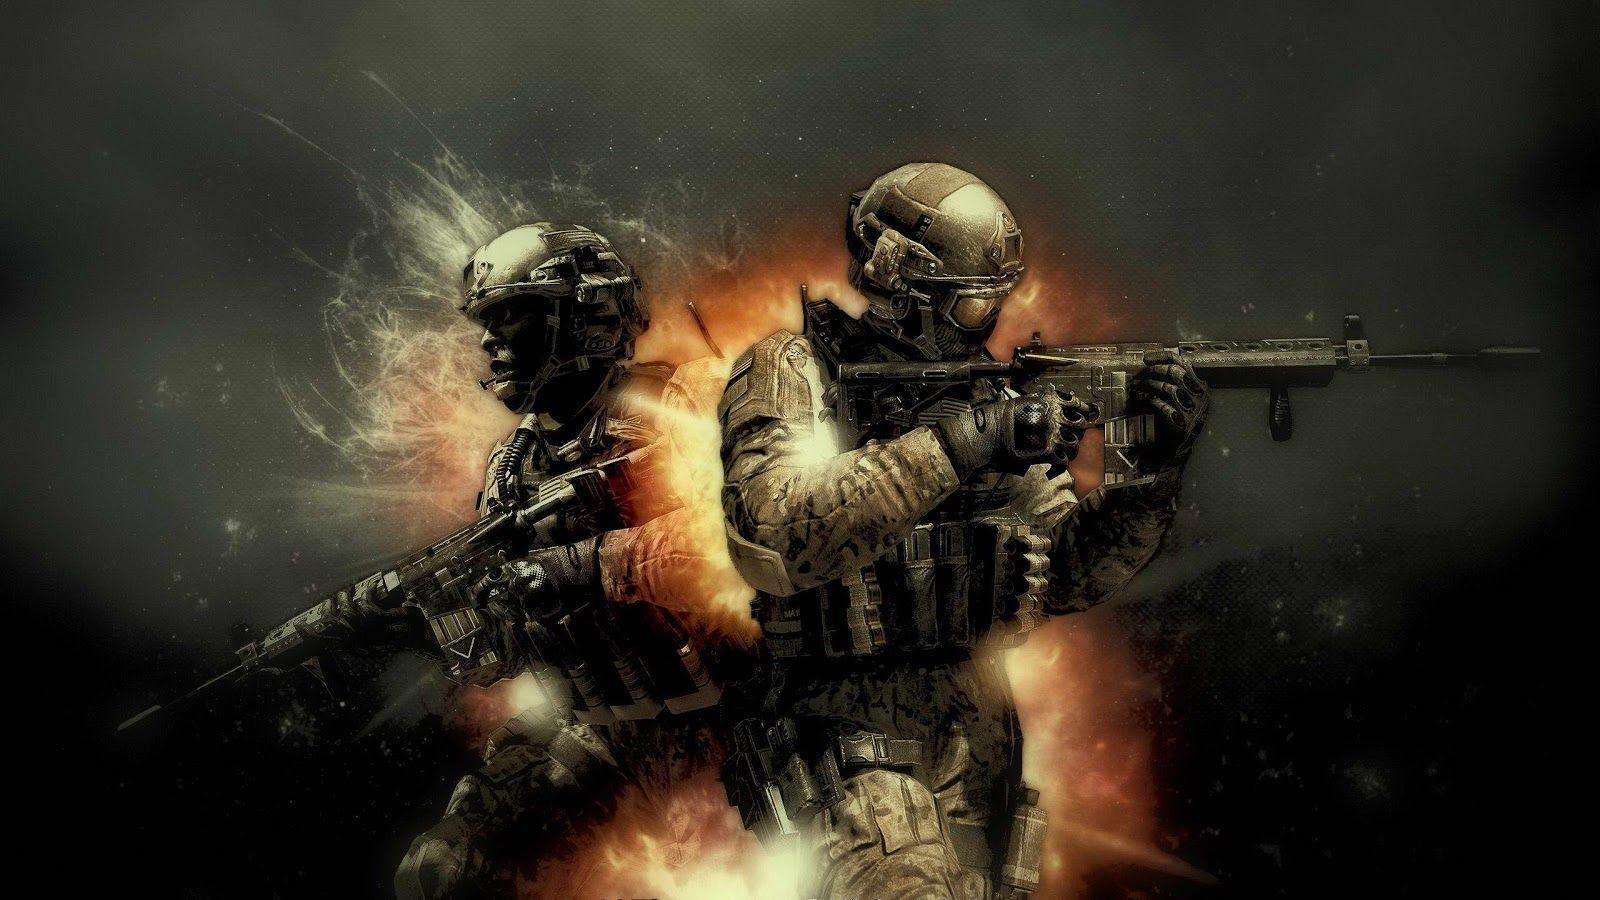 Cool Cod Wallpapers - Wallpaper Cave